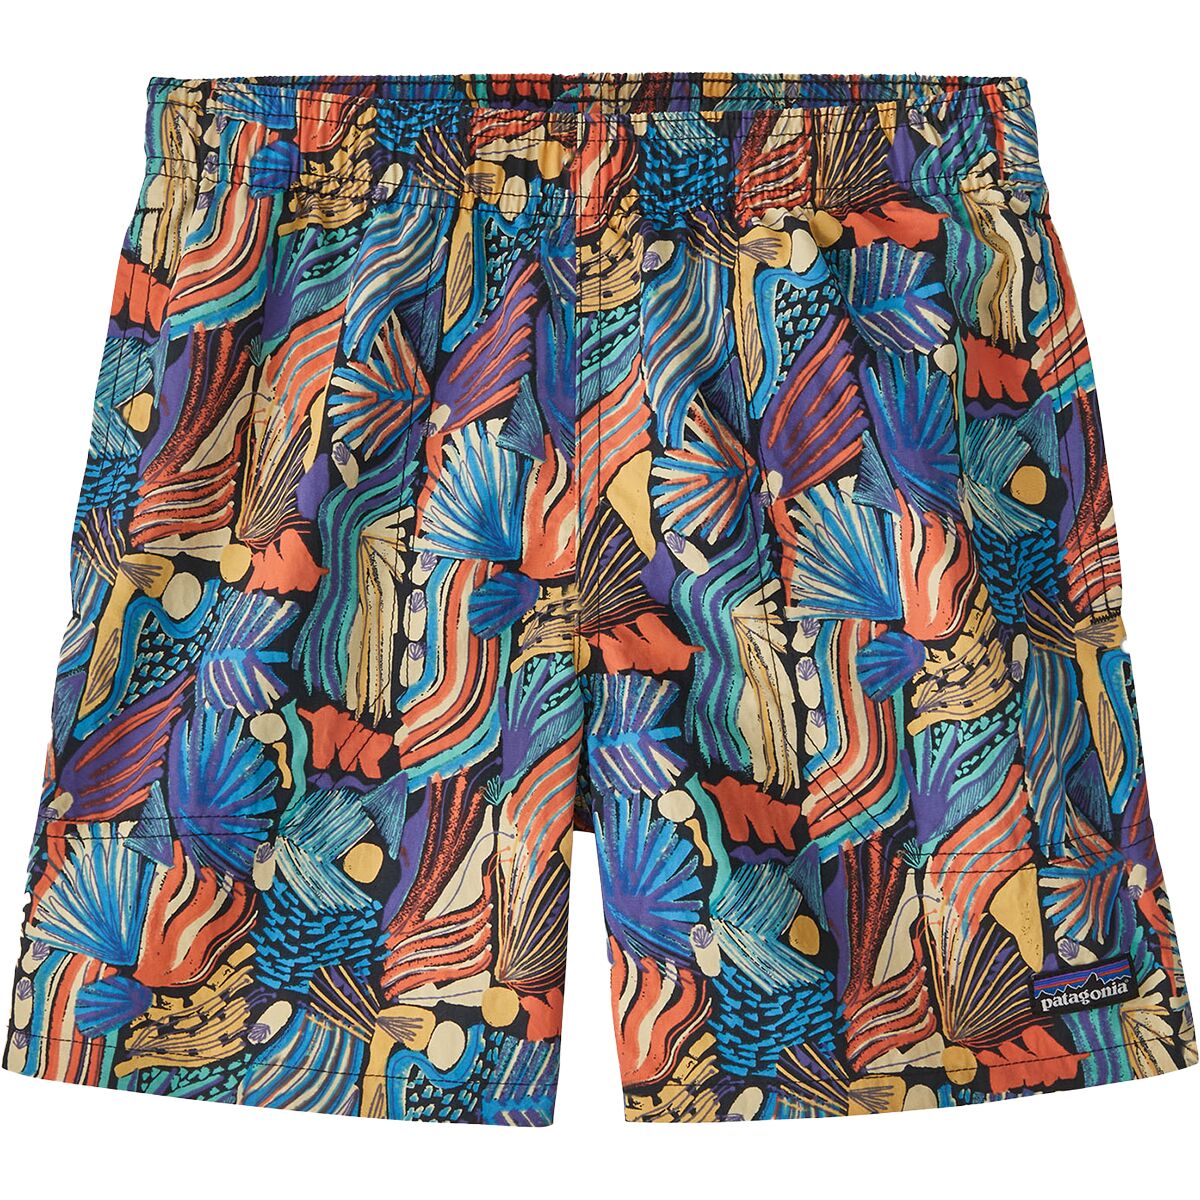 Patagonia Baggies Shorts 5 in. - Lined Joy: Pitch Blue / L